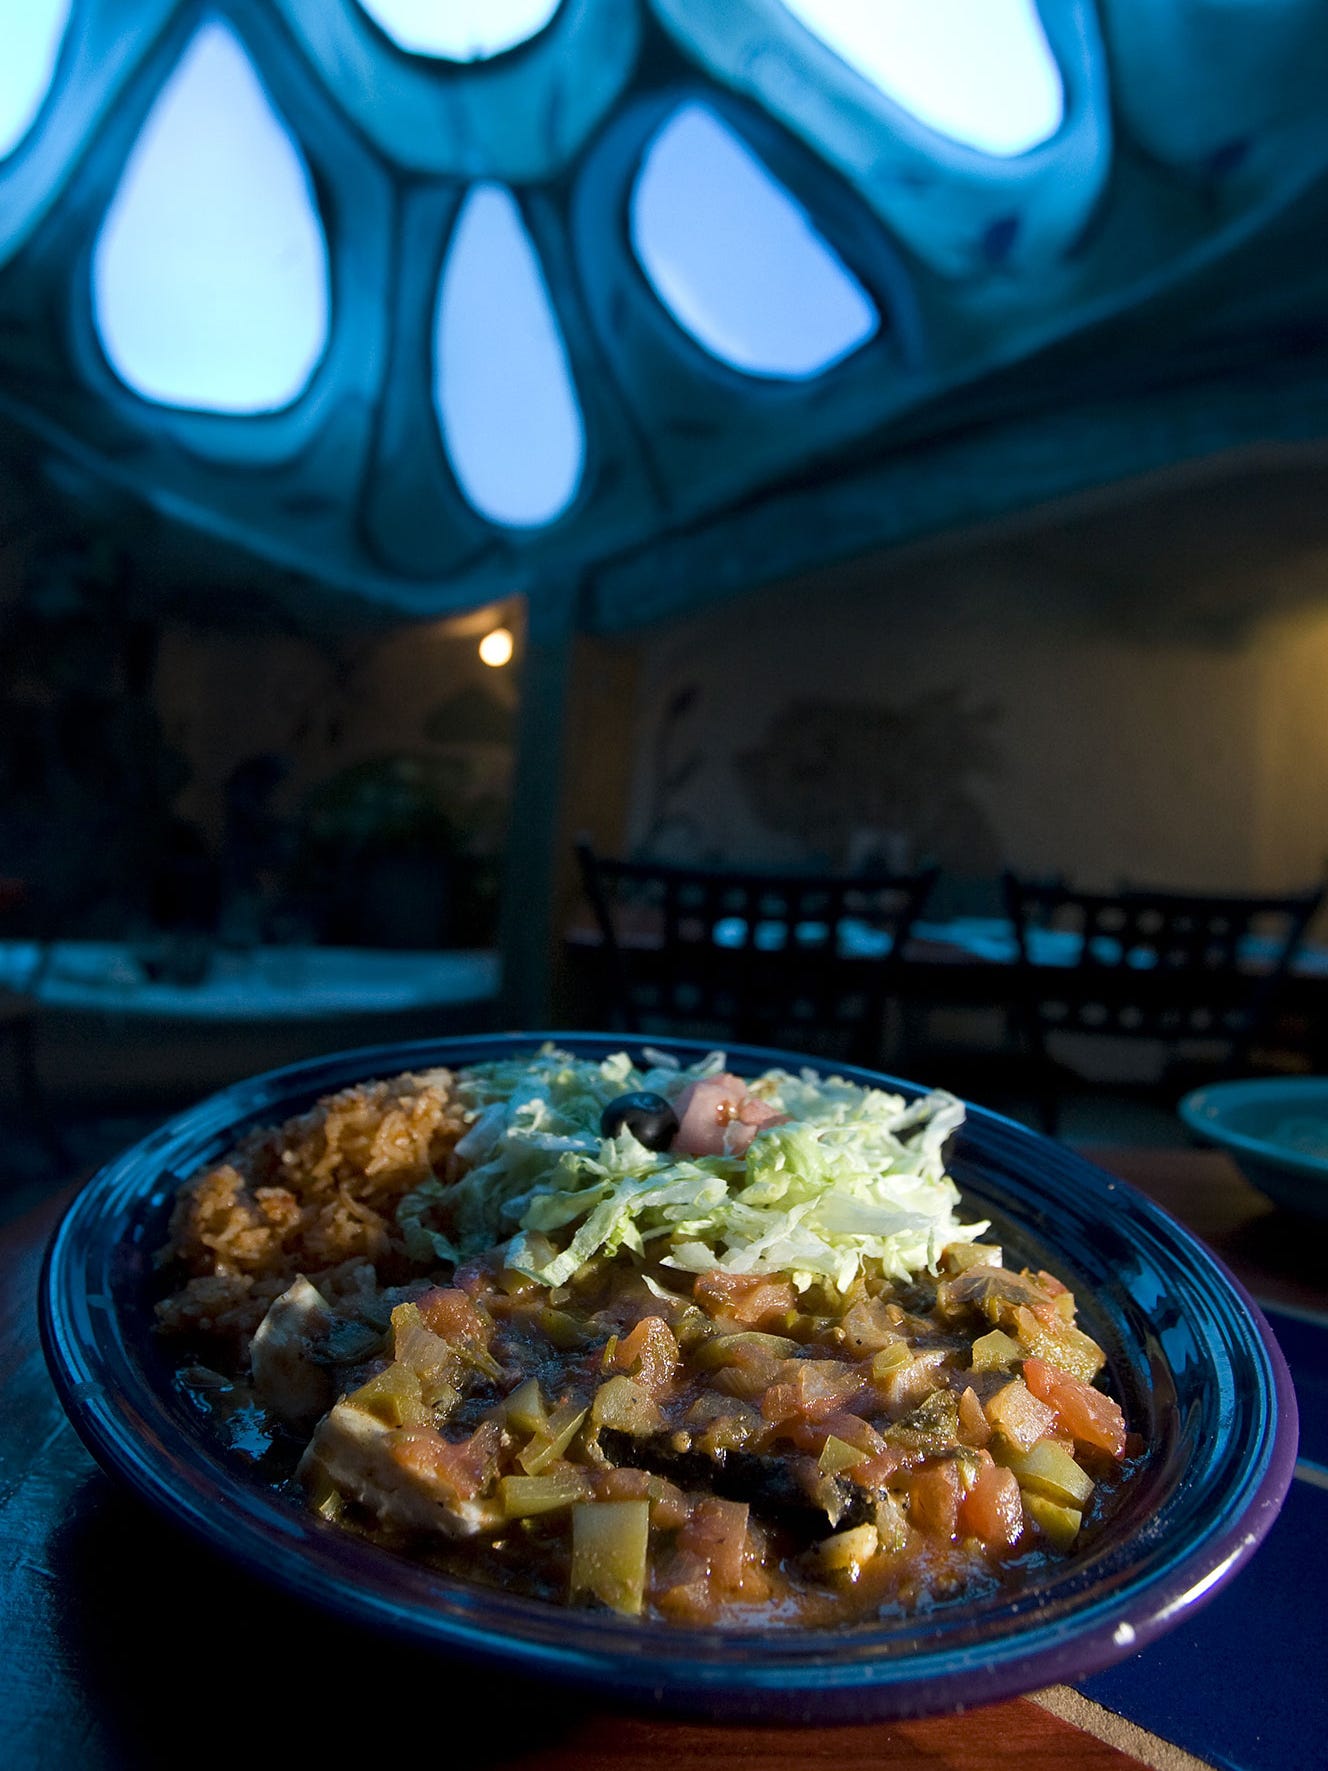 Mexican restaurants in Arizona are a unique blend of cultures, histories  and cuisine.